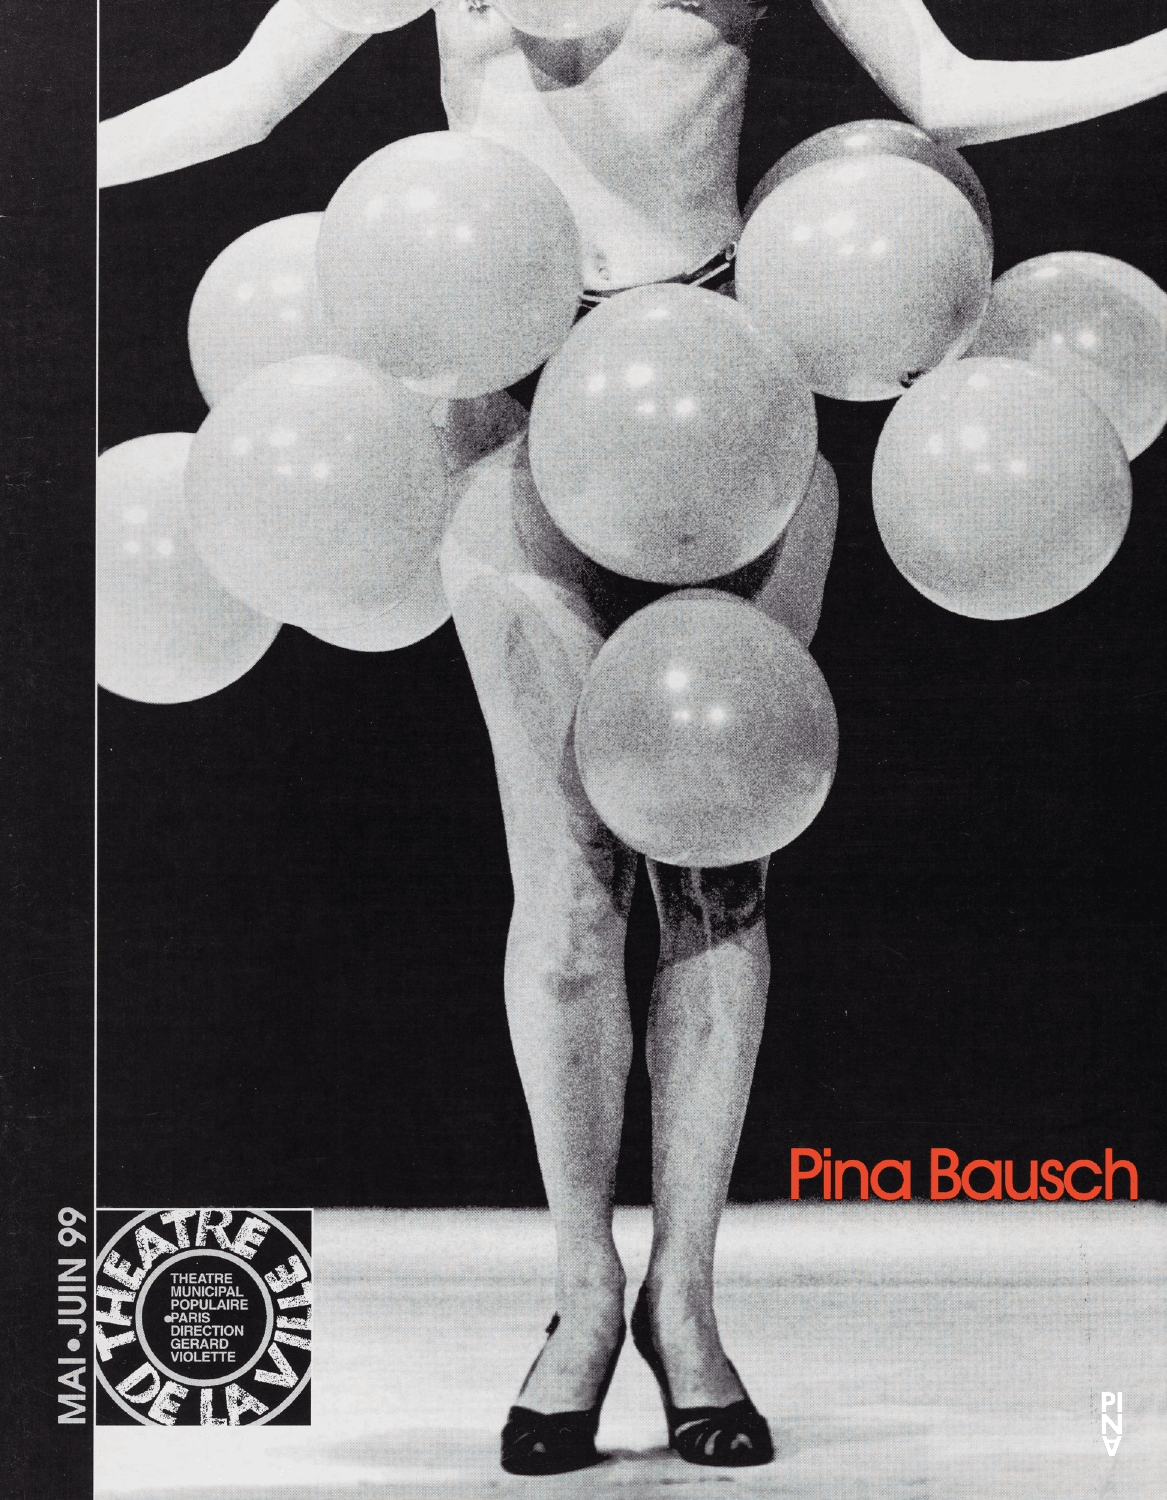 Short term programme for “Masurca Fogo” by Pina Bausch with Tanztheater Wuppertal in in Paris, 05/02/1999 – 05/05/1999